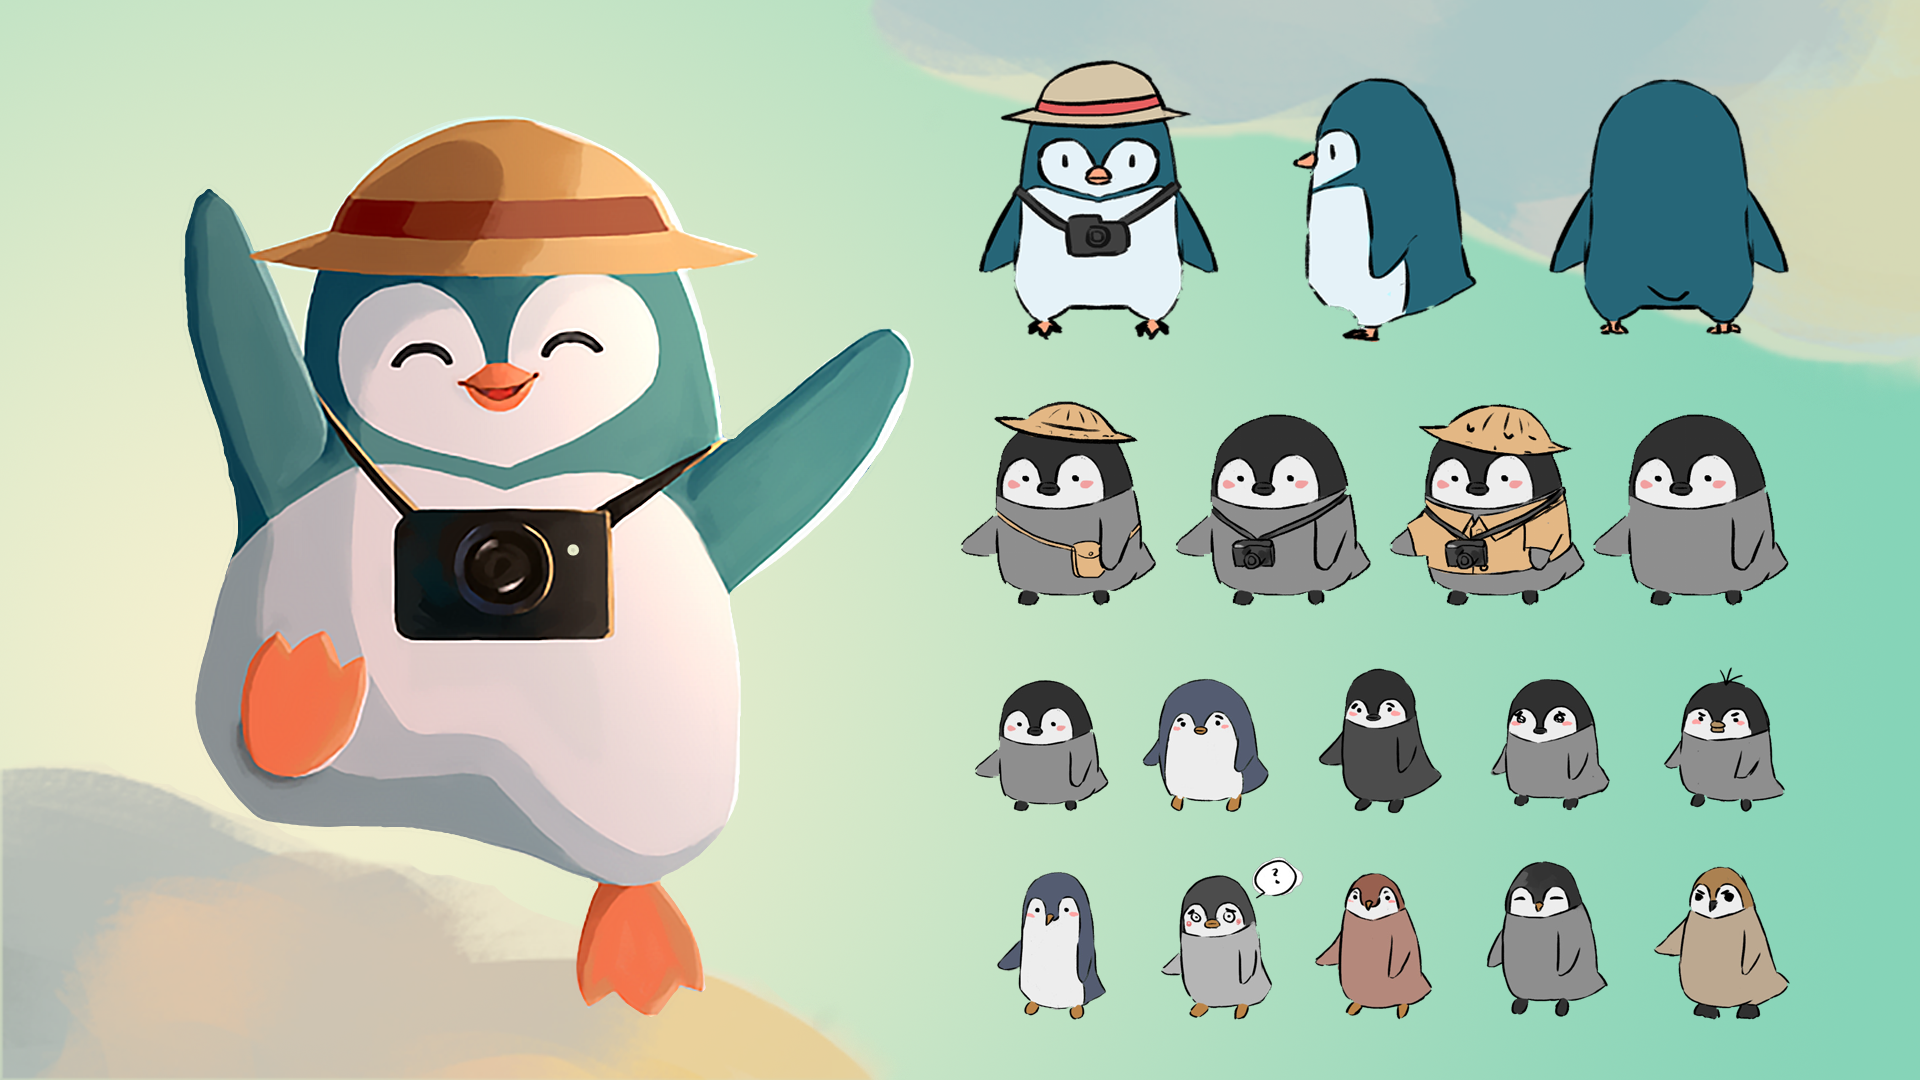 Doodles of Bokki, the penguin! You are never fully dressed without a smile... and a camera!